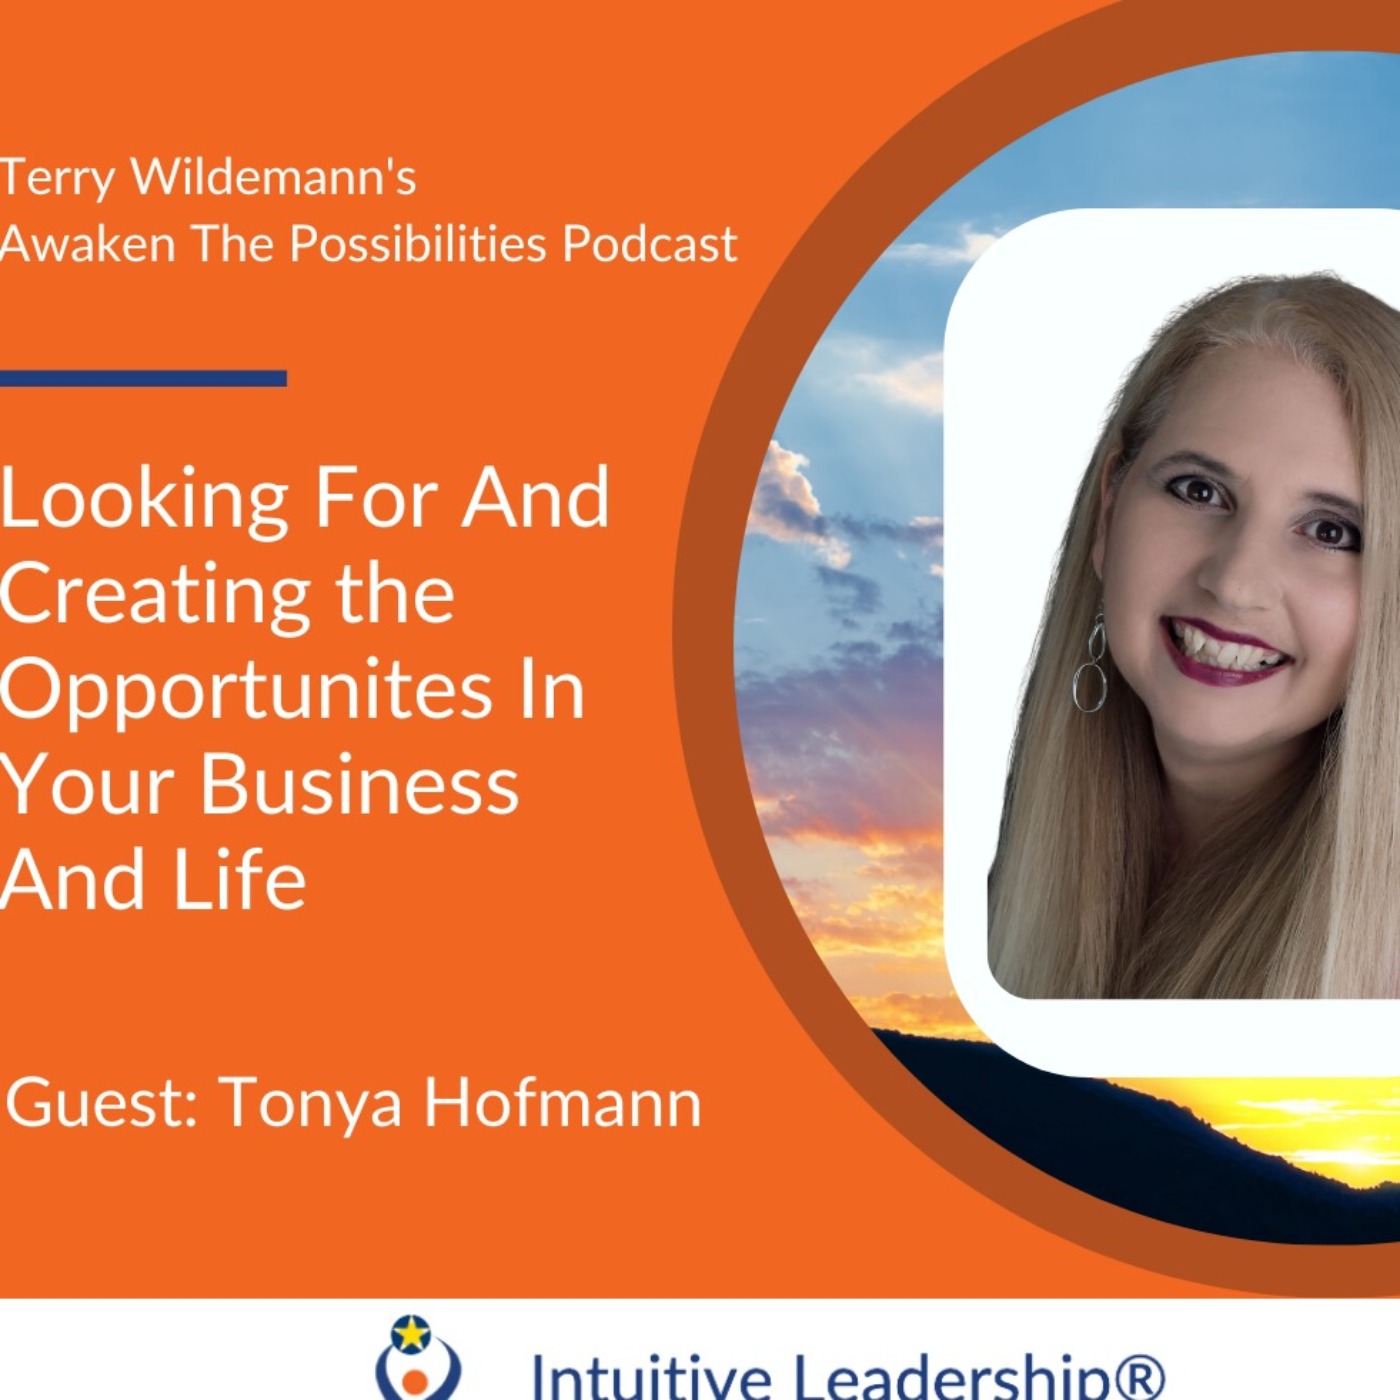 Looking For and Creating The Opportunities in Your Business and Life